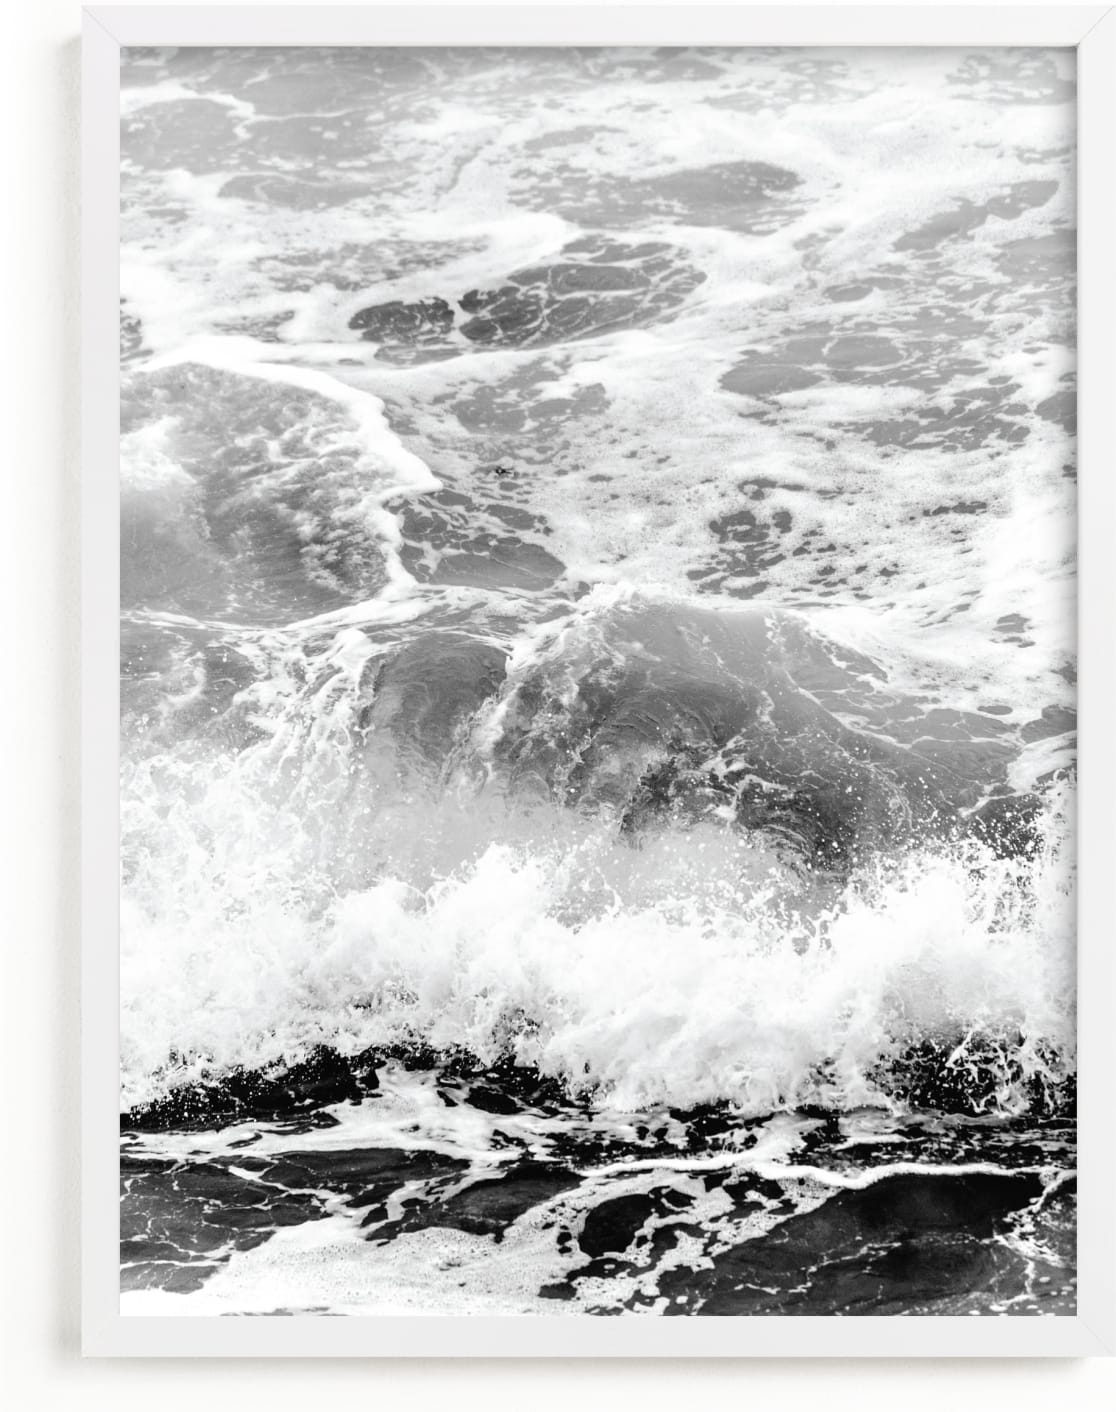 This is a black and white art by Kamala Nahas called Storm Swell.